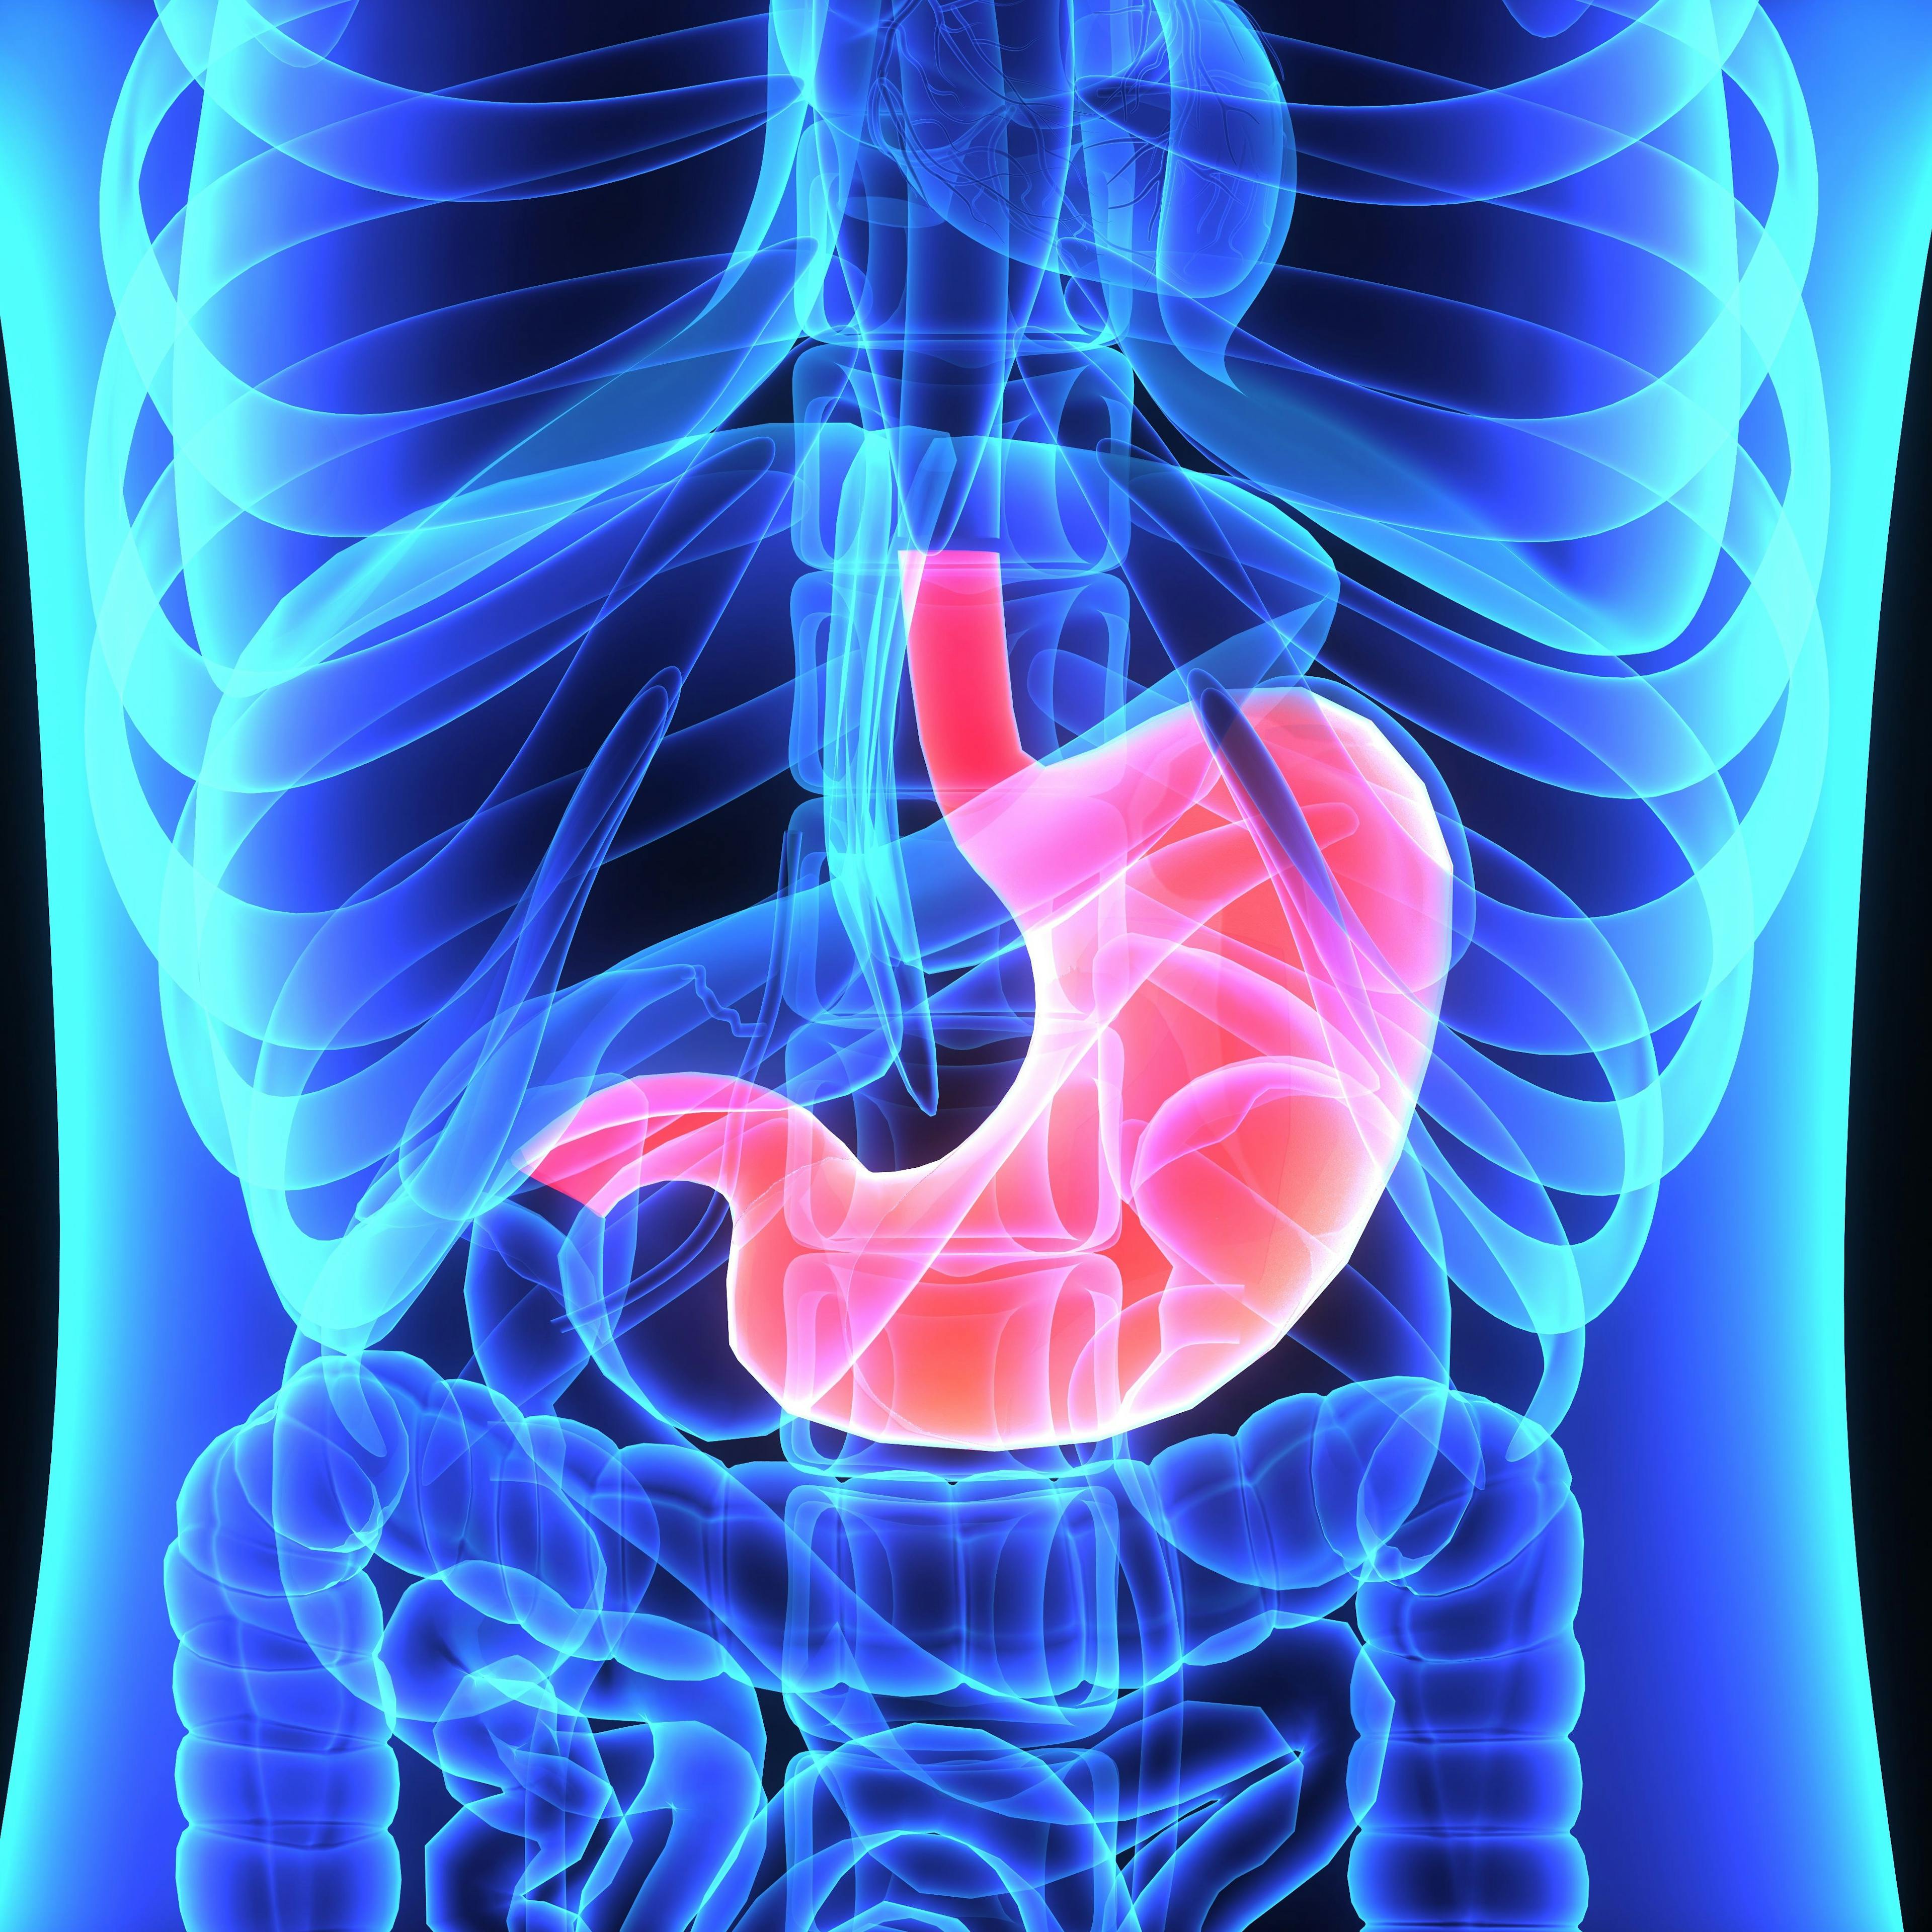 Patients with locally advanced unresectable or metastatic gastric or gastroesophageal junction adenocarcinoma may experience significant survival benefit following treatment with zolbetuximab.